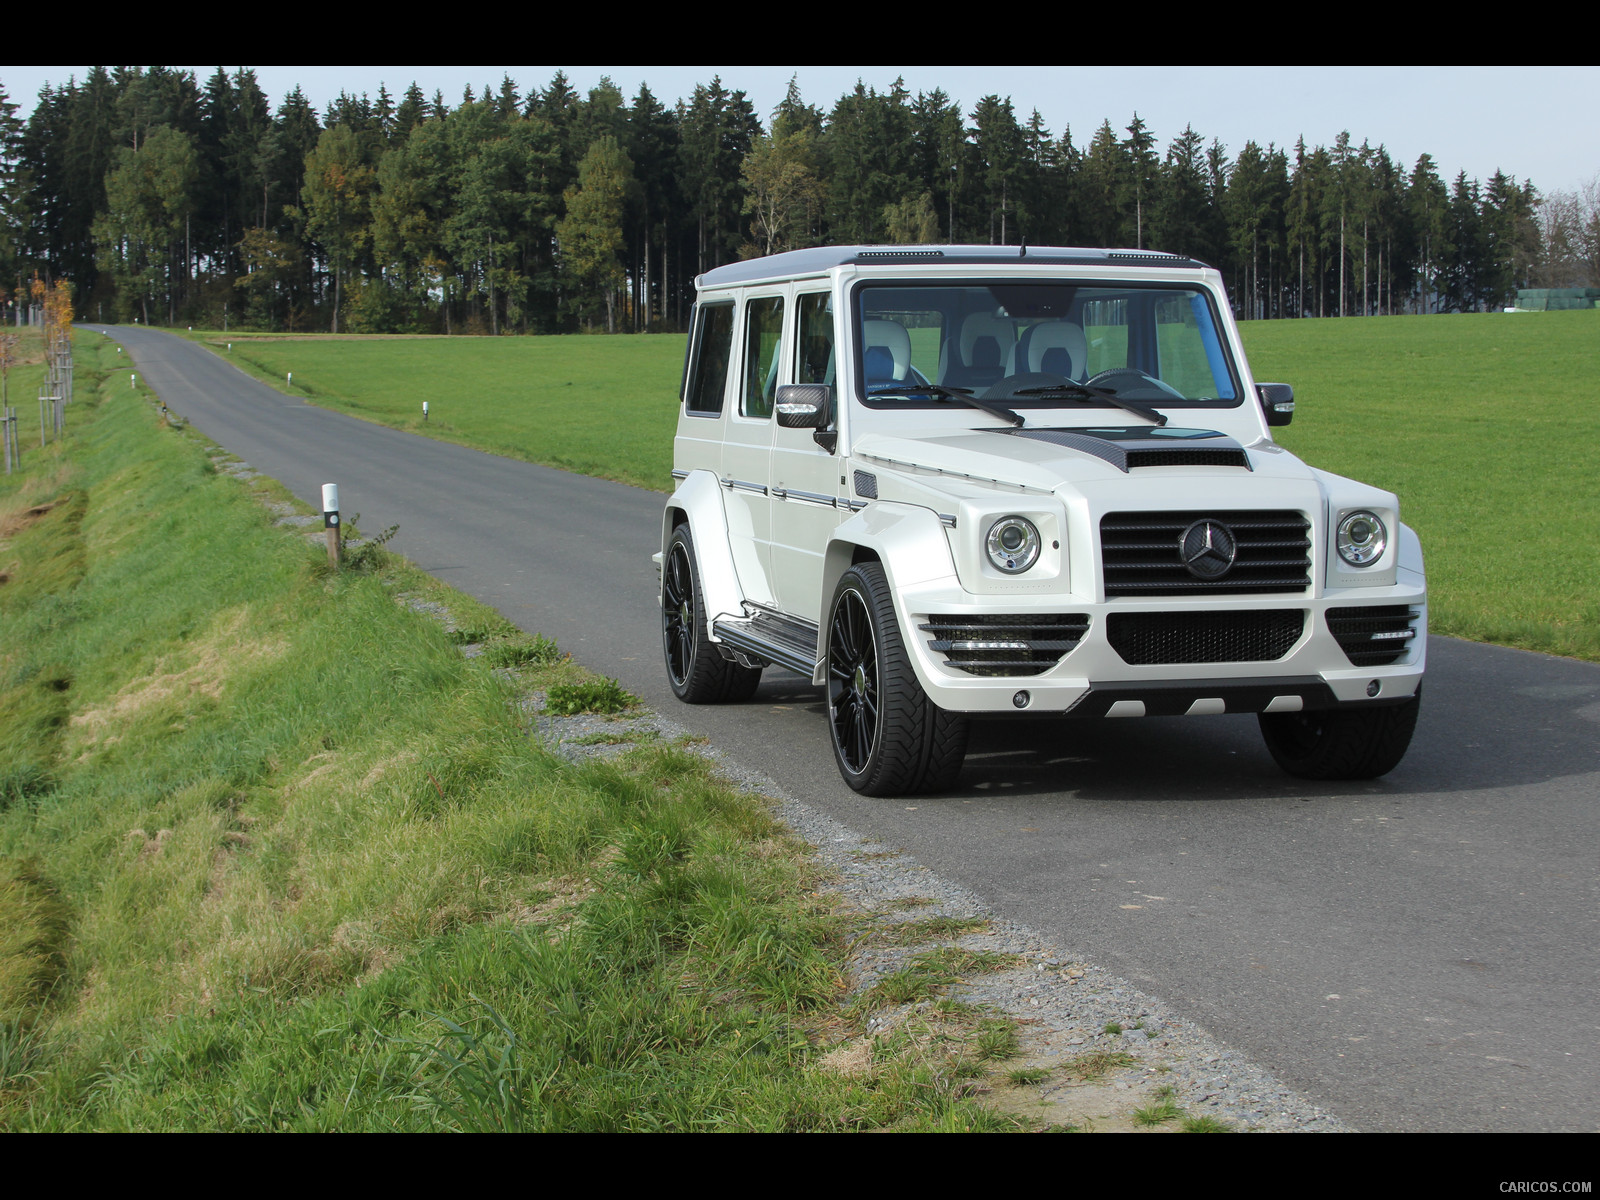 Mansory G-Couture based on Mercedes G-Class White - Front, #19 of 39